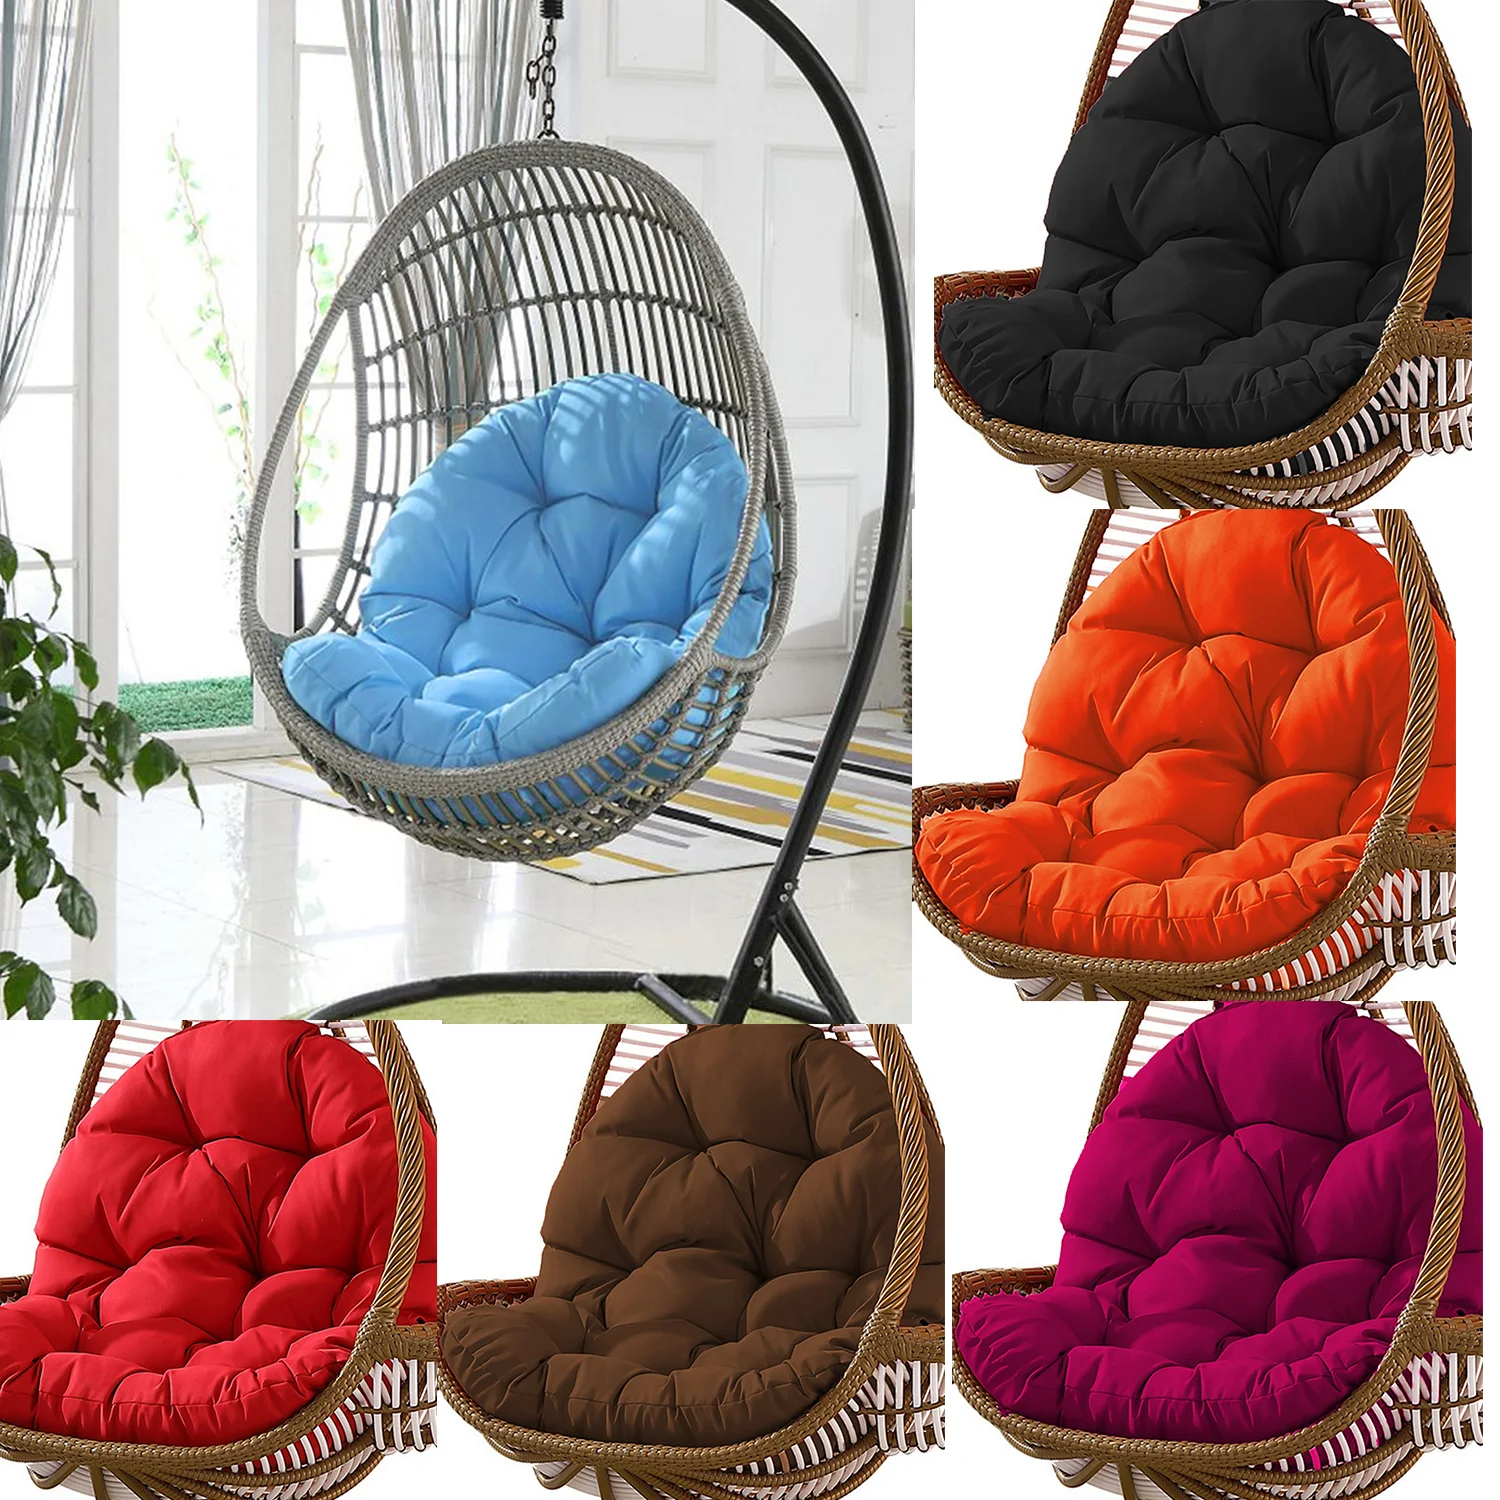 Swing Hanging Basket Seat Cushion Thickened Hanging Egg Hammock Chair Pads for Home Patio Garden 31 x 47 inch